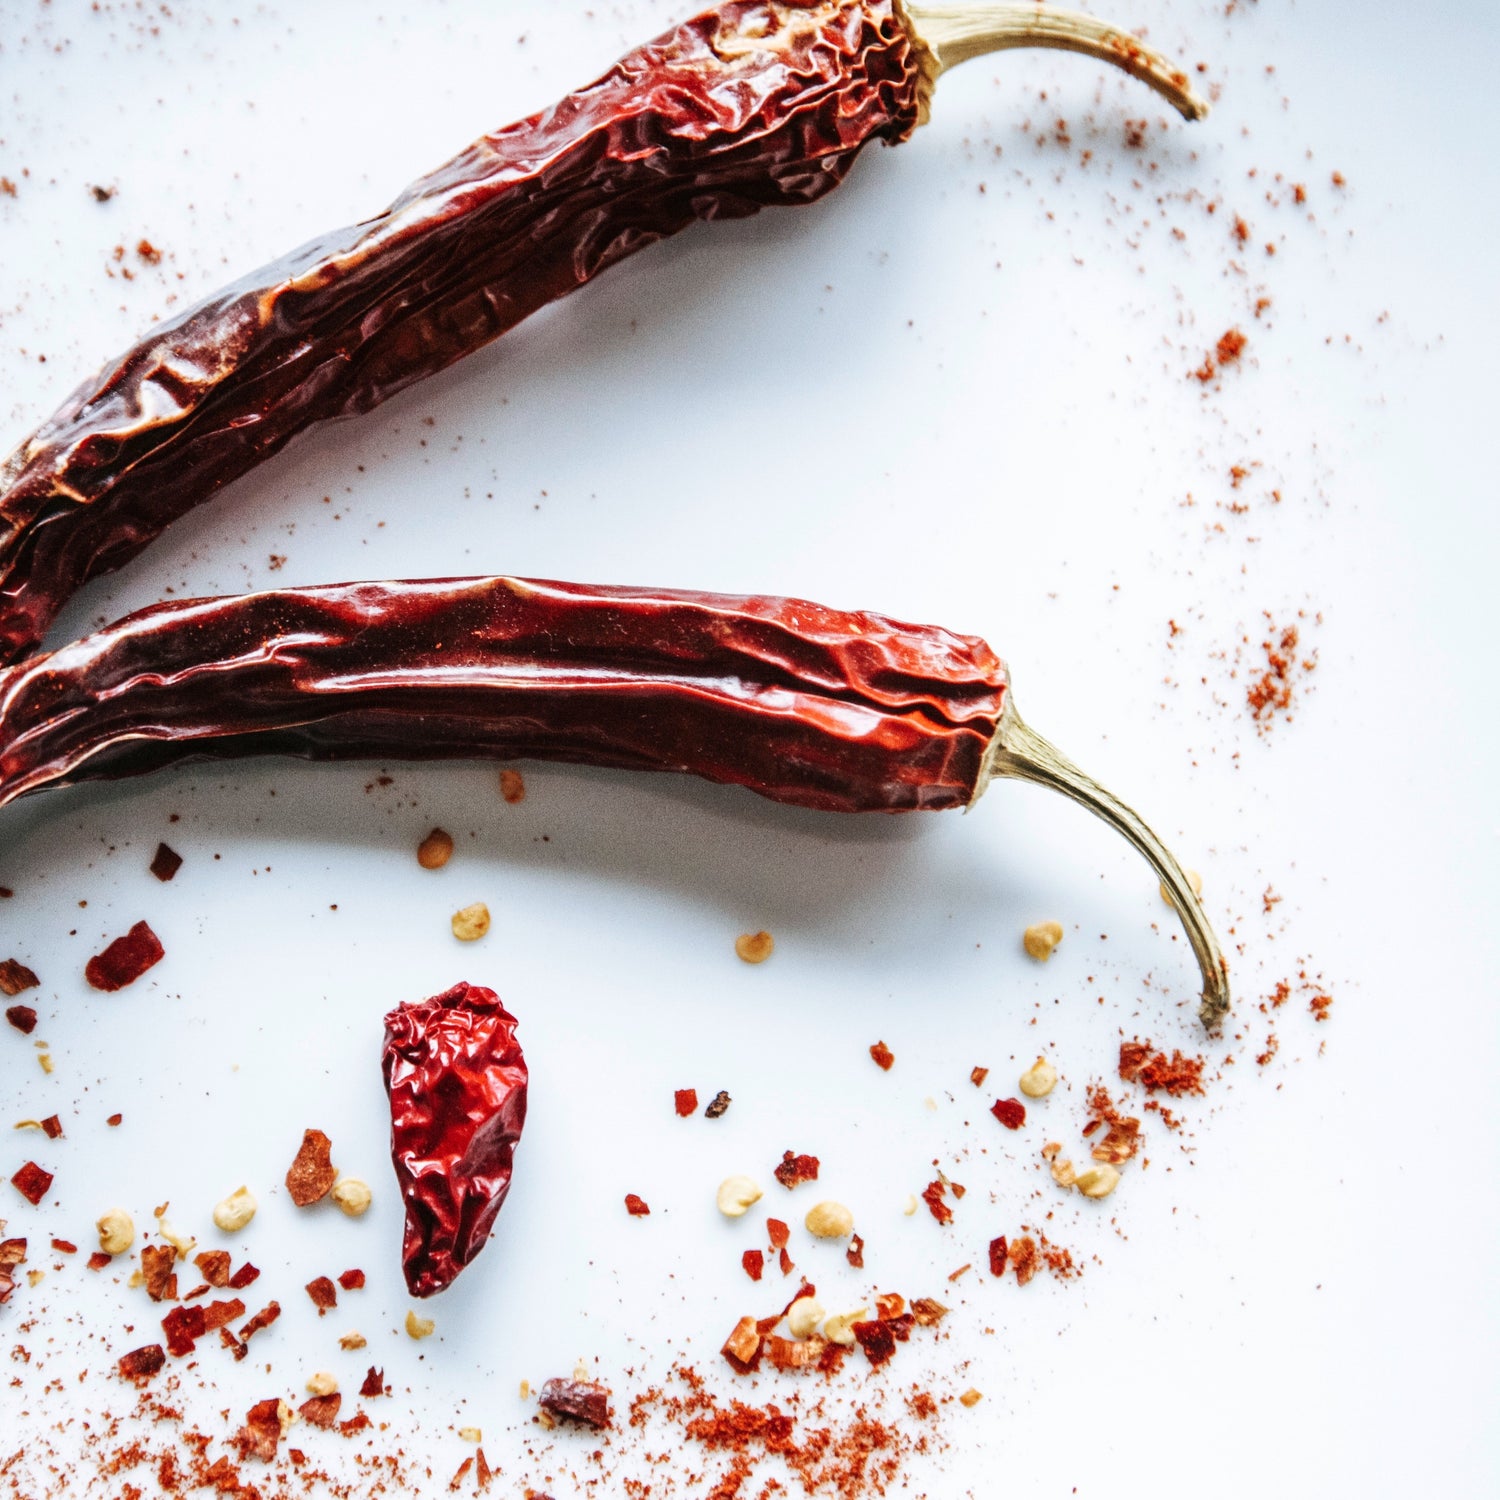 dried chili peppers on a white background